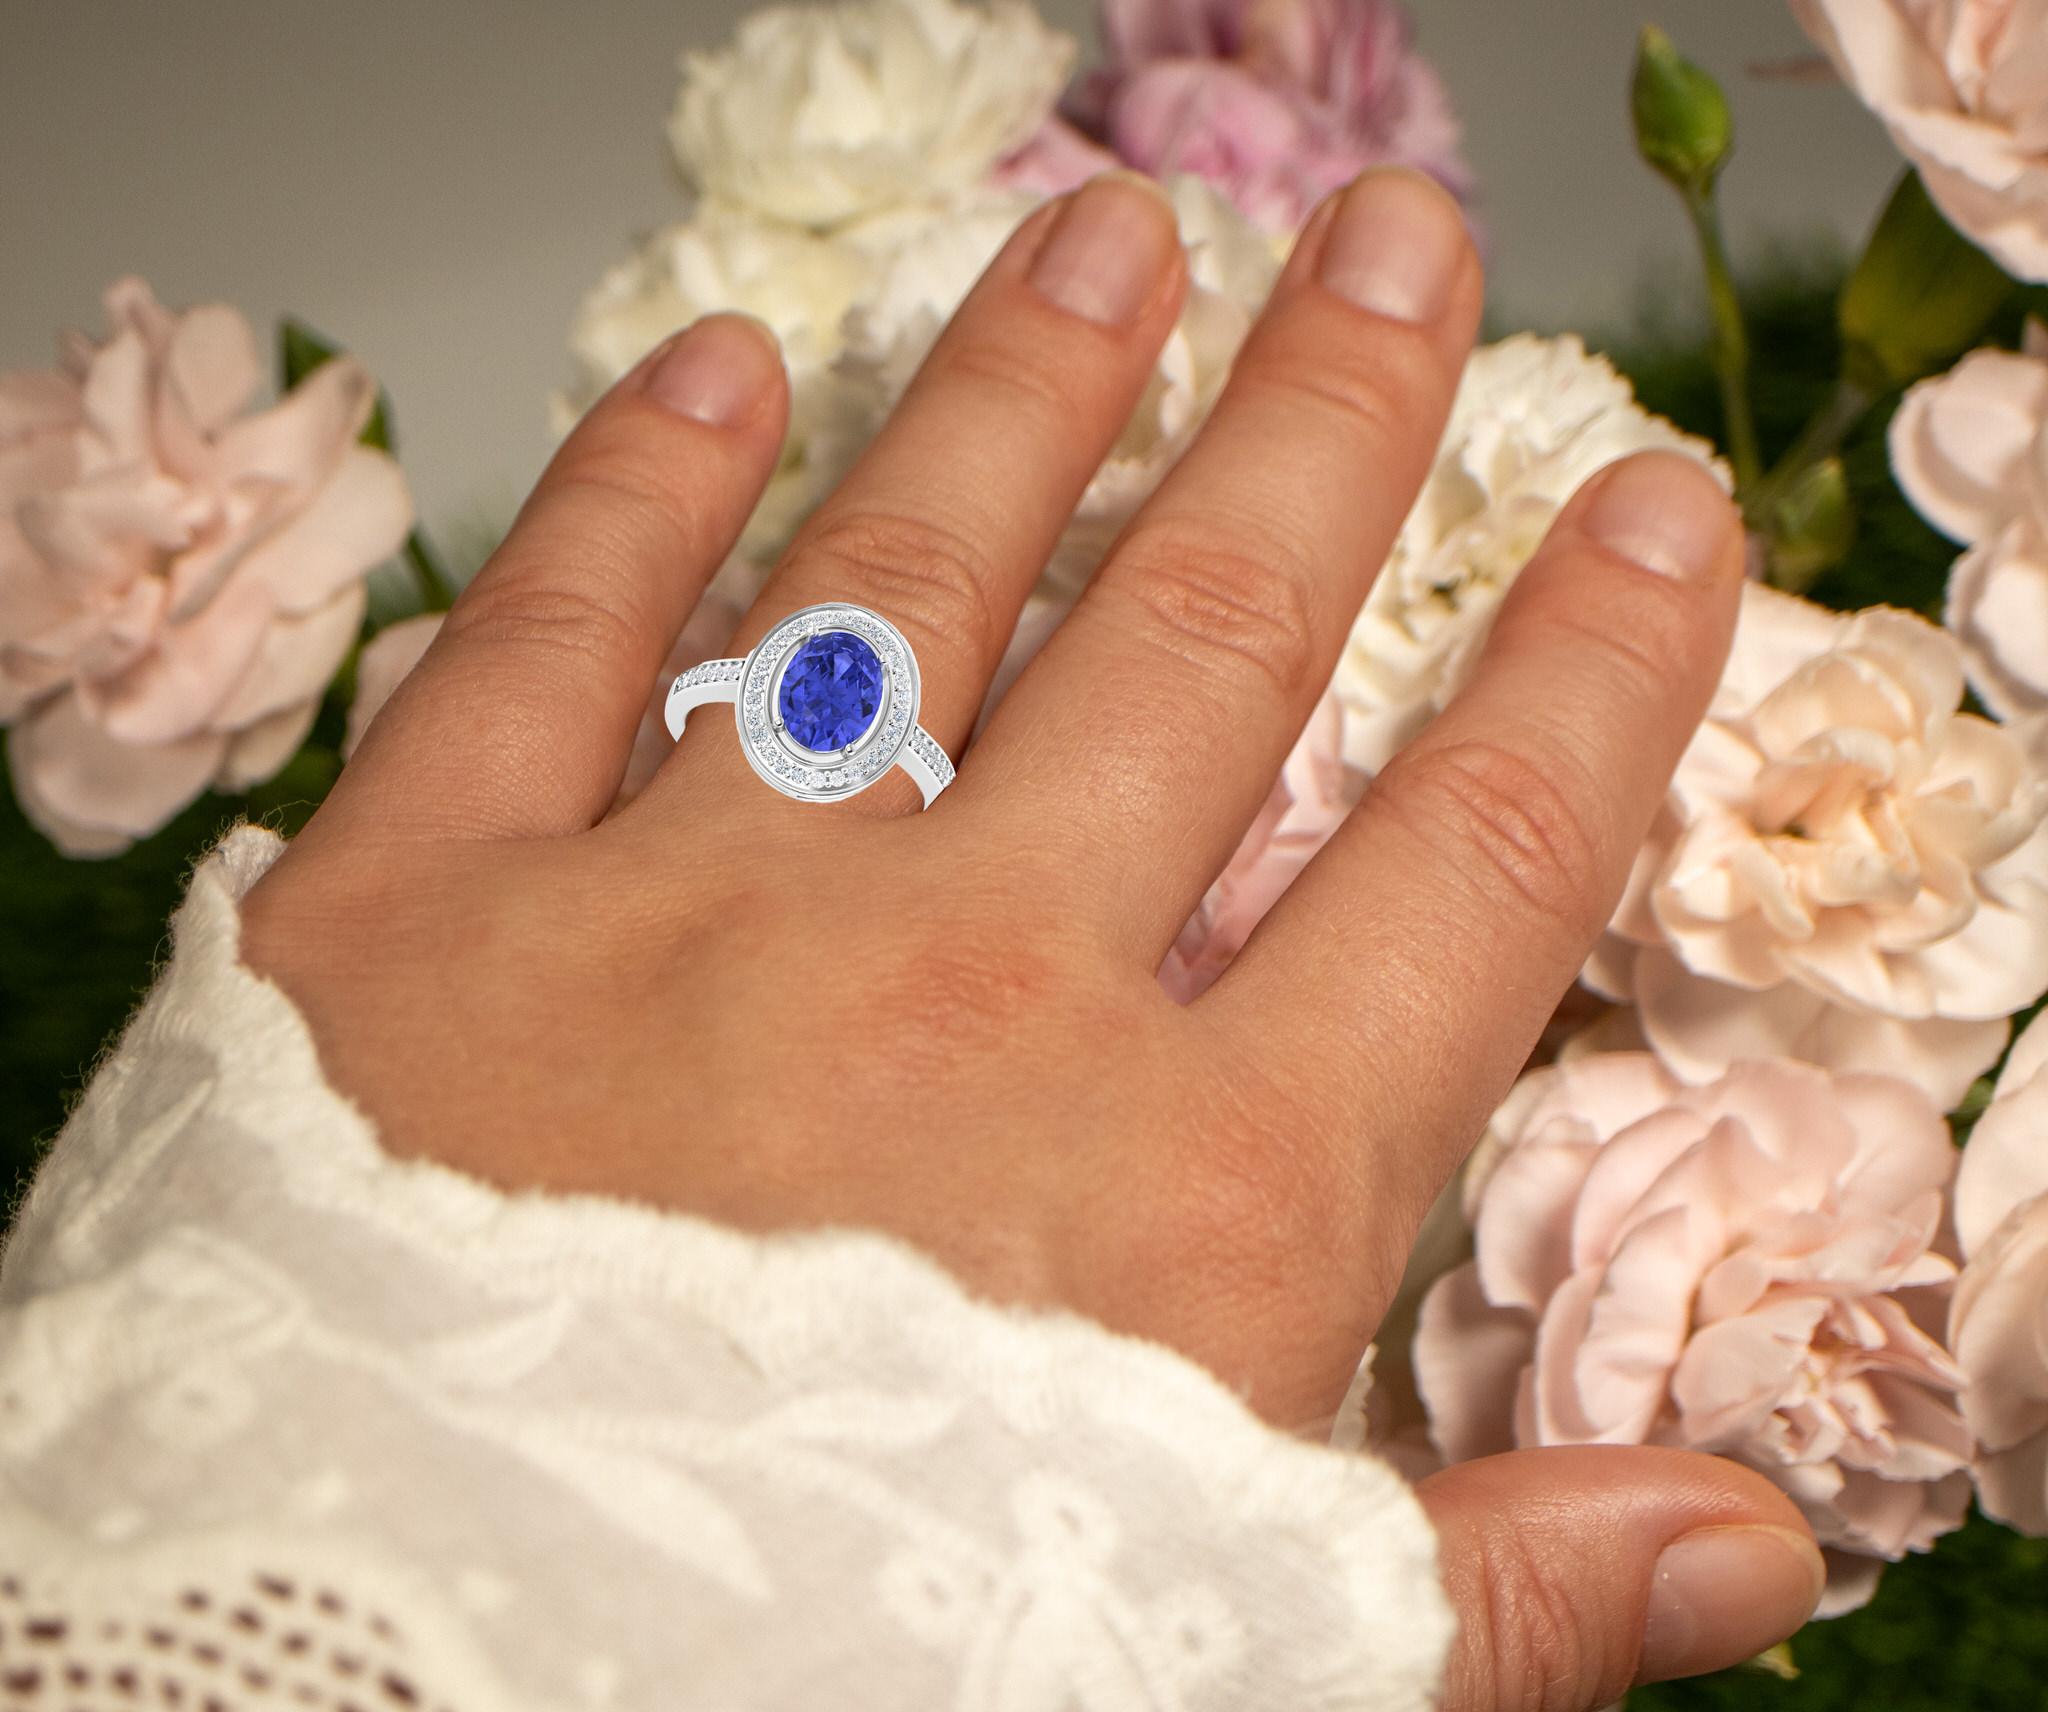 It comes with the appraisal by GIA GG/AJP
All Gemstones are Natural
1 Tanzanite = 1.70 Carat
38 Diamonds = 0.23 Carats
Metal: 14K White Gold
Ring Size: 7* US
*It can be resized complimentary